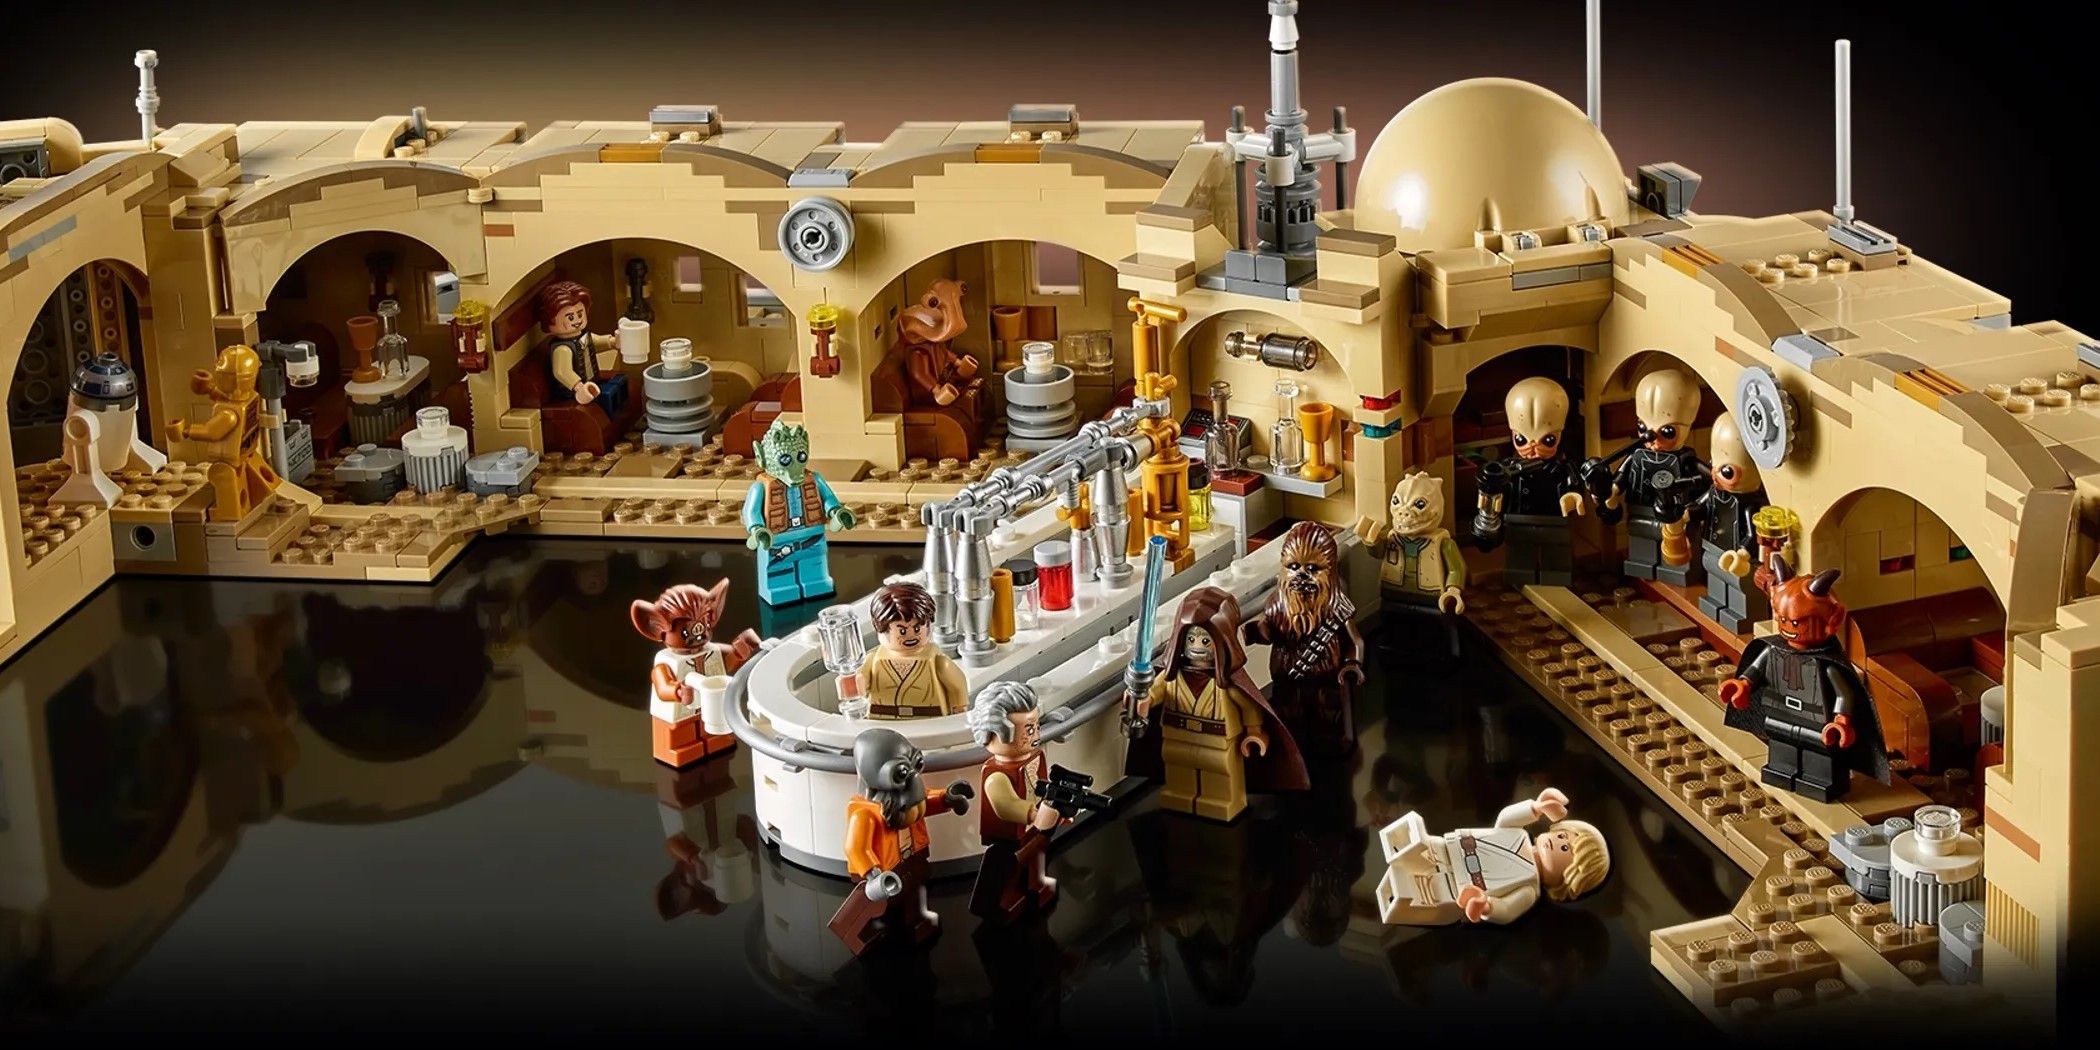 A scene from Mos Eisley Cantina with Luke being attacked, recreated in Lego